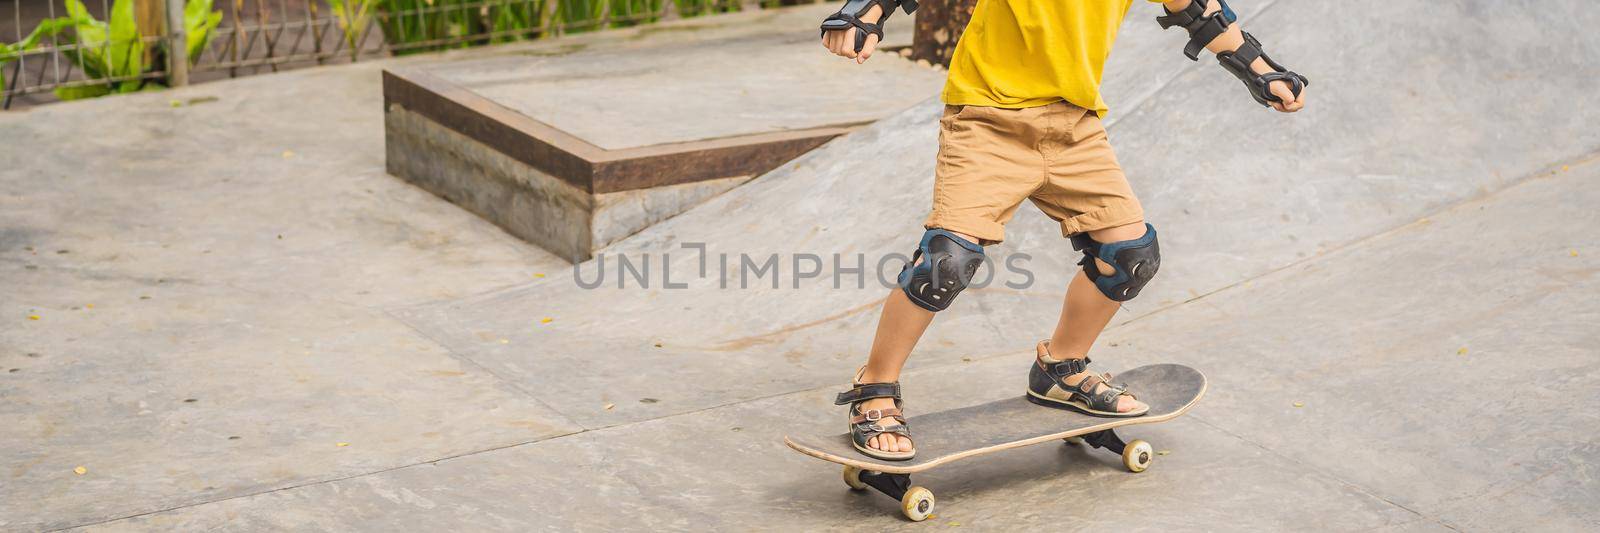 Athletic boy in helmet and knee pads learns to skateboard with in a skate park. Children education, sports BANNER, LONG FORMAT by galitskaya